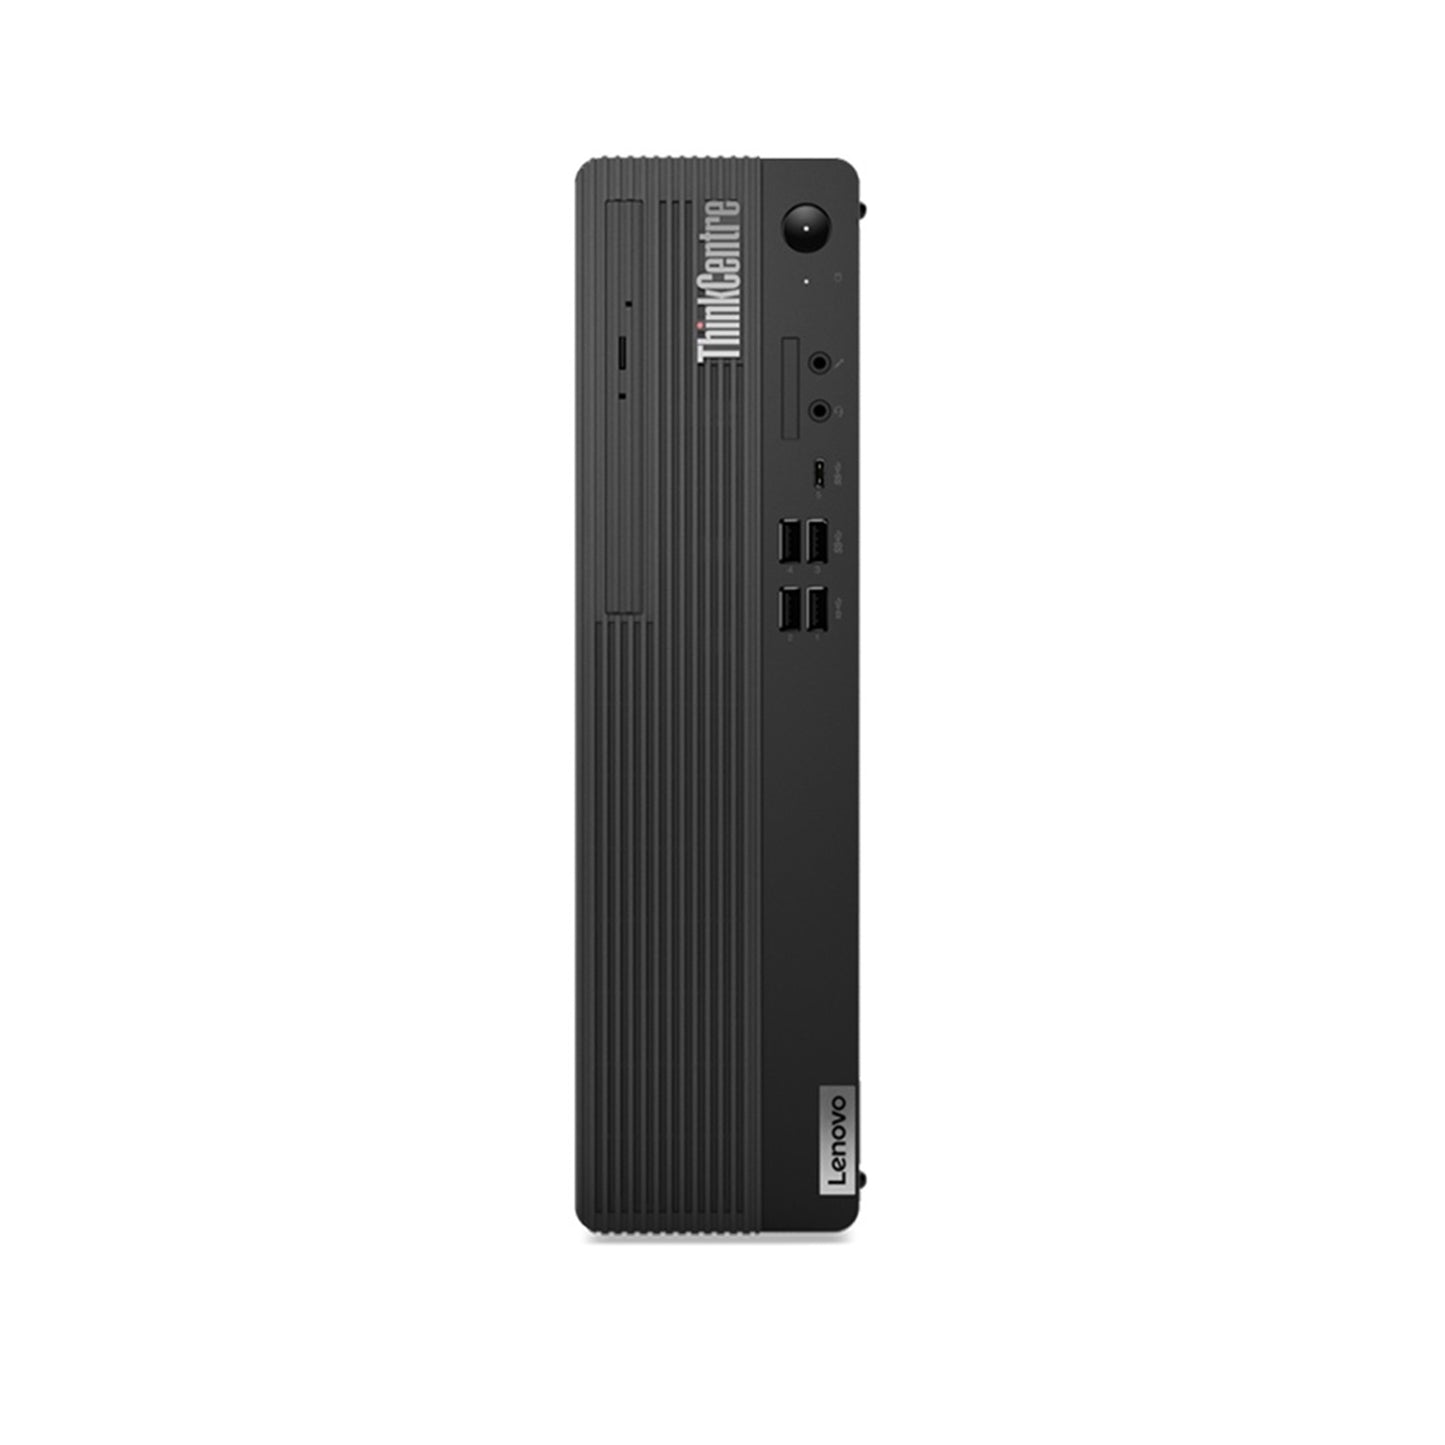 Lenovo ThinkCentre M90s 11D10048UK Small Form Factor PC, Intel Core i5-10500 vPro, 16GB RAM, 512GB SSD, DVDRW, Windows 10 Pro with Keyboard and Mouse